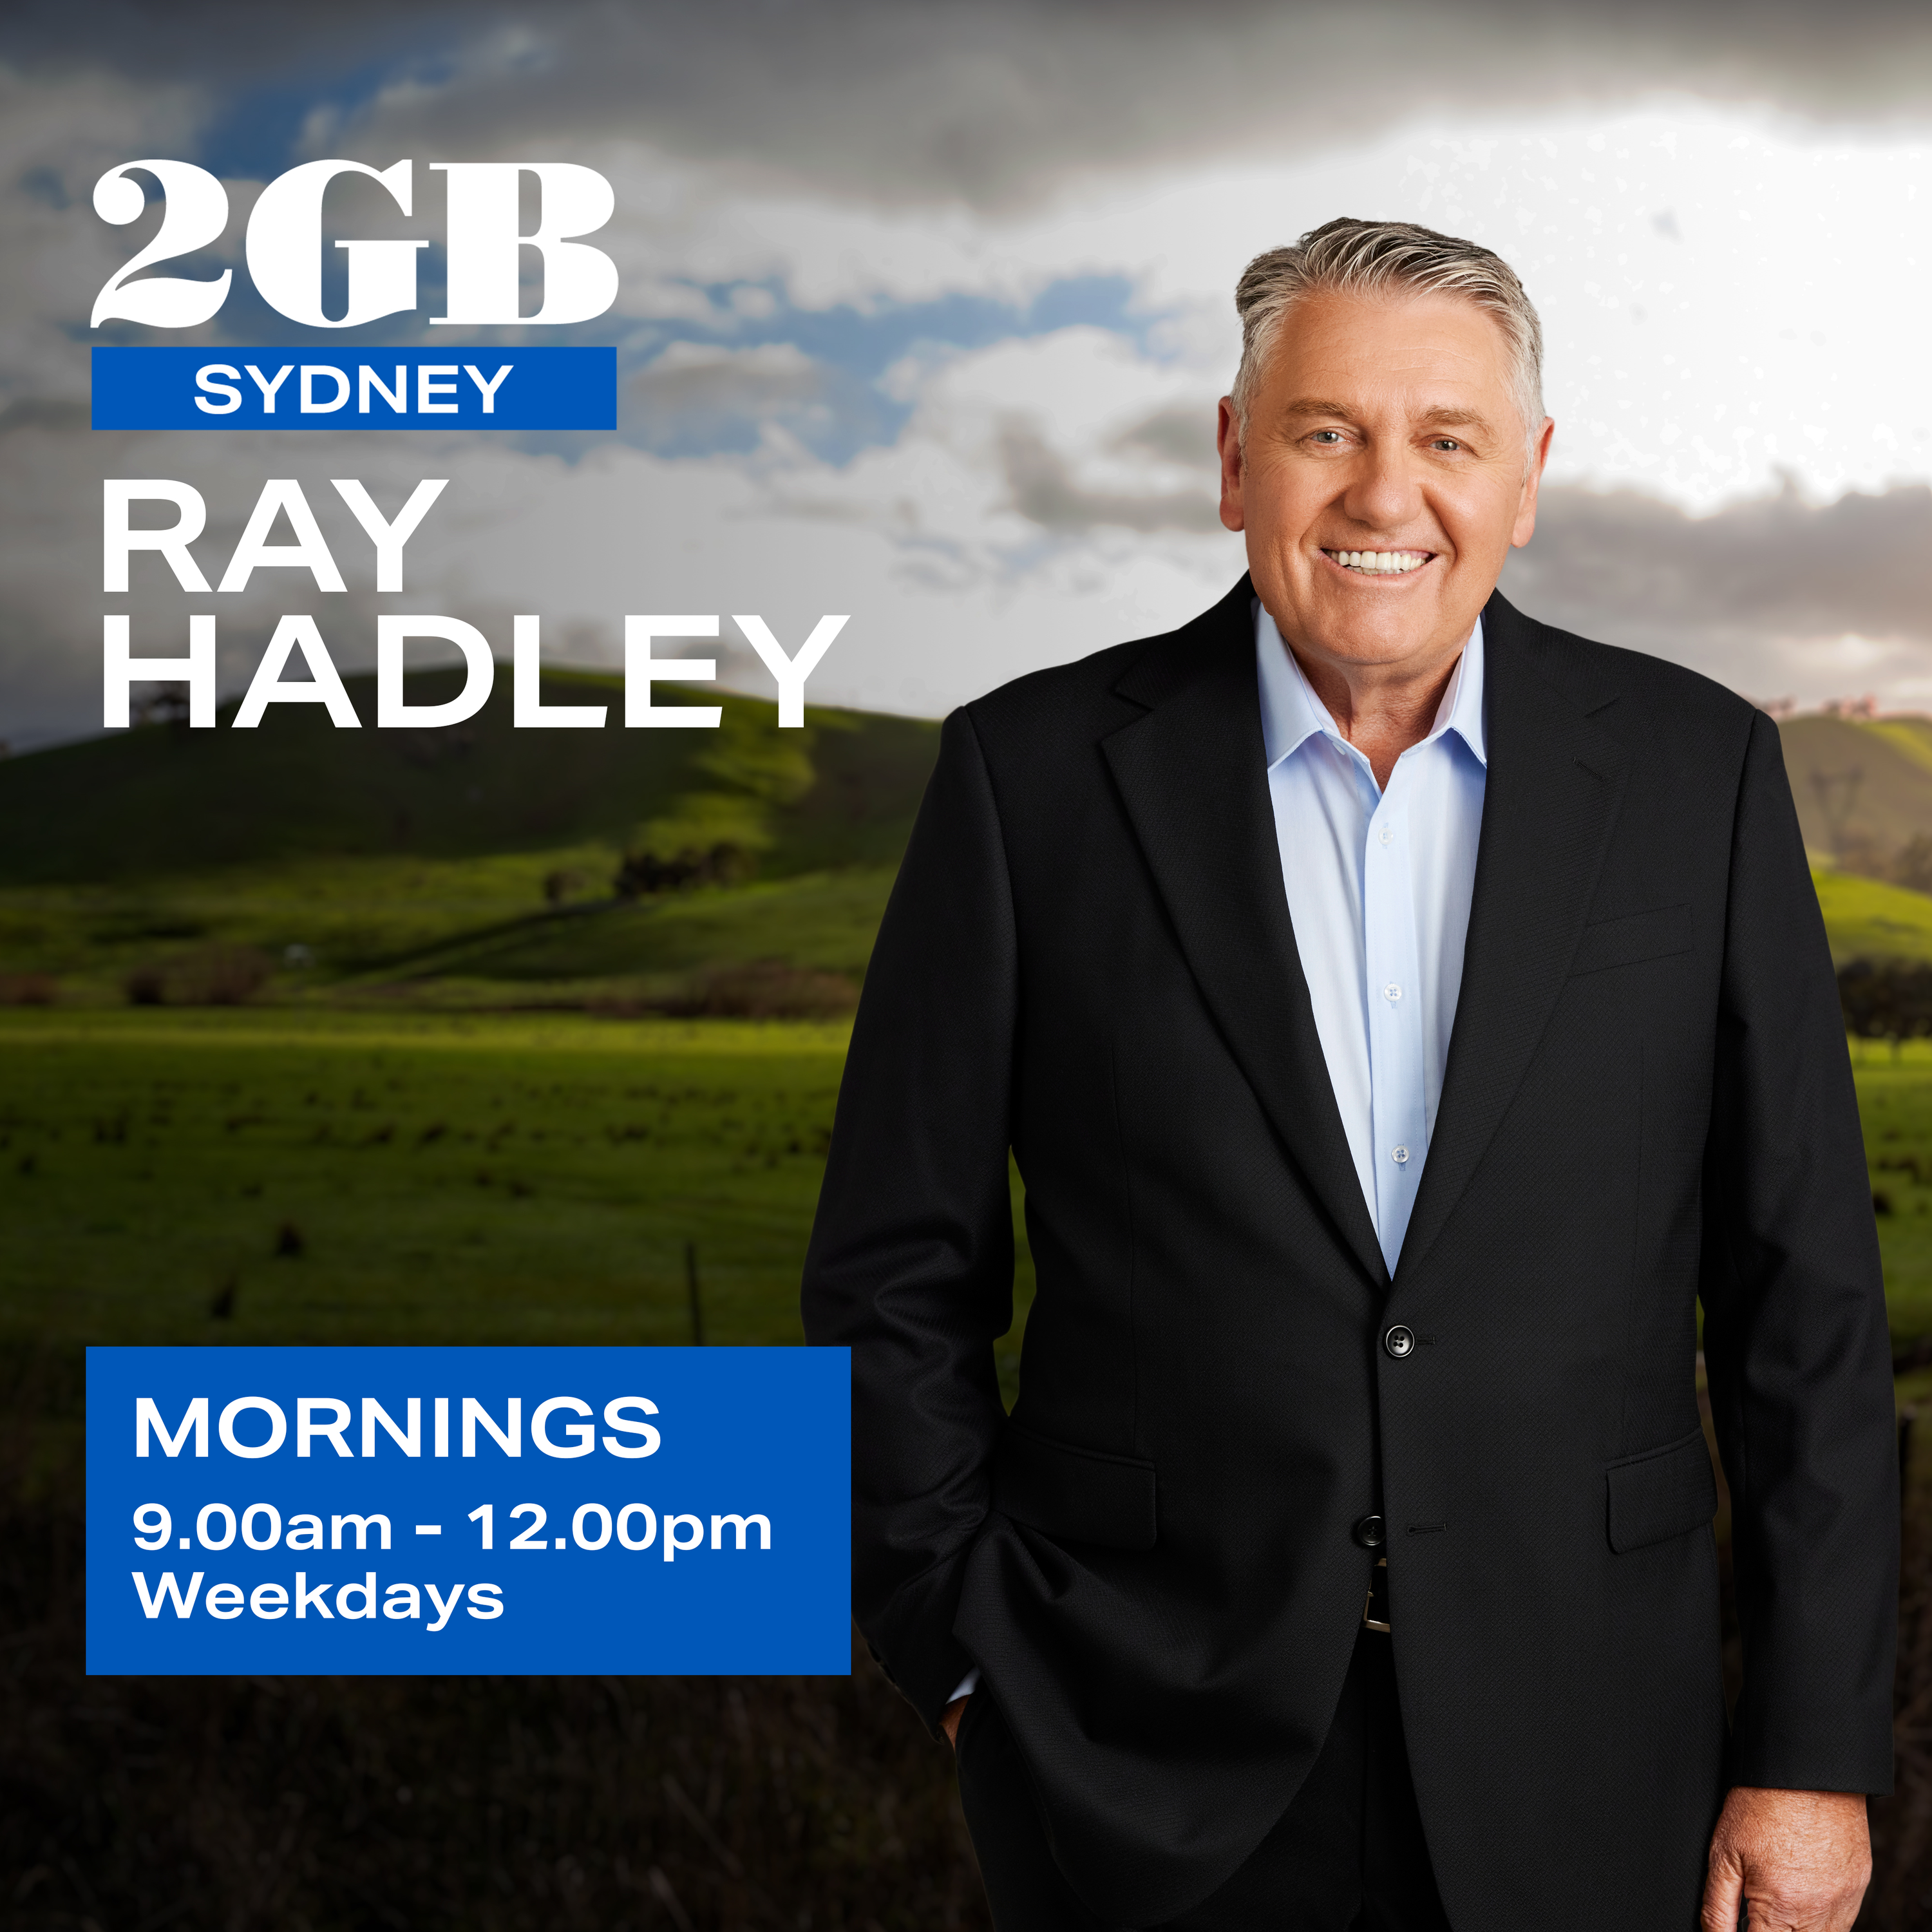 The Ray Hadley Morning Show - Full Show, September 22nd